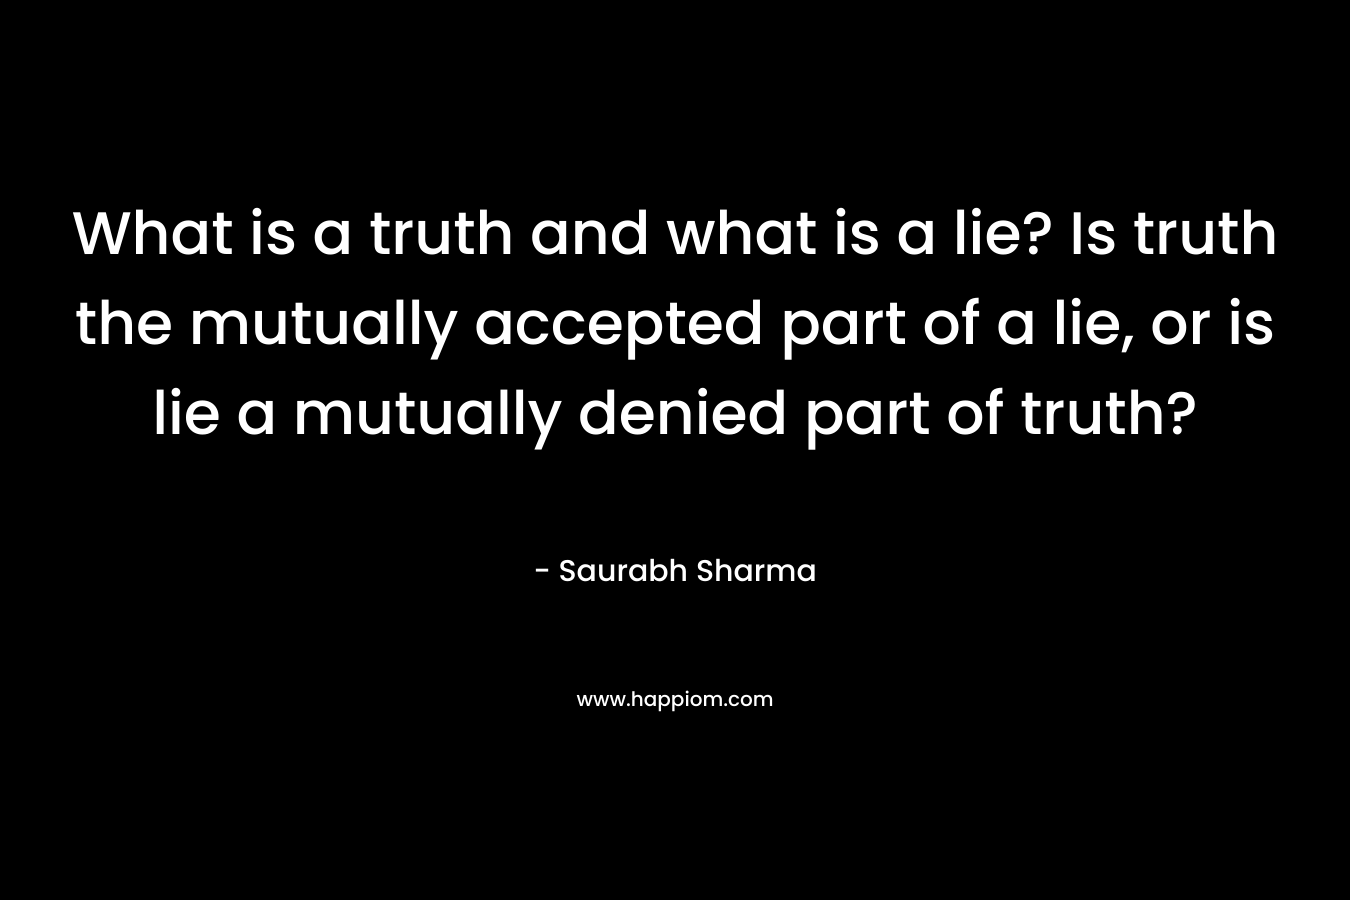 What is a truth and what is a lie? Is truth the mutually accepted part of a lie, or is lie a mutually denied part of truth? – Saurabh Sharma